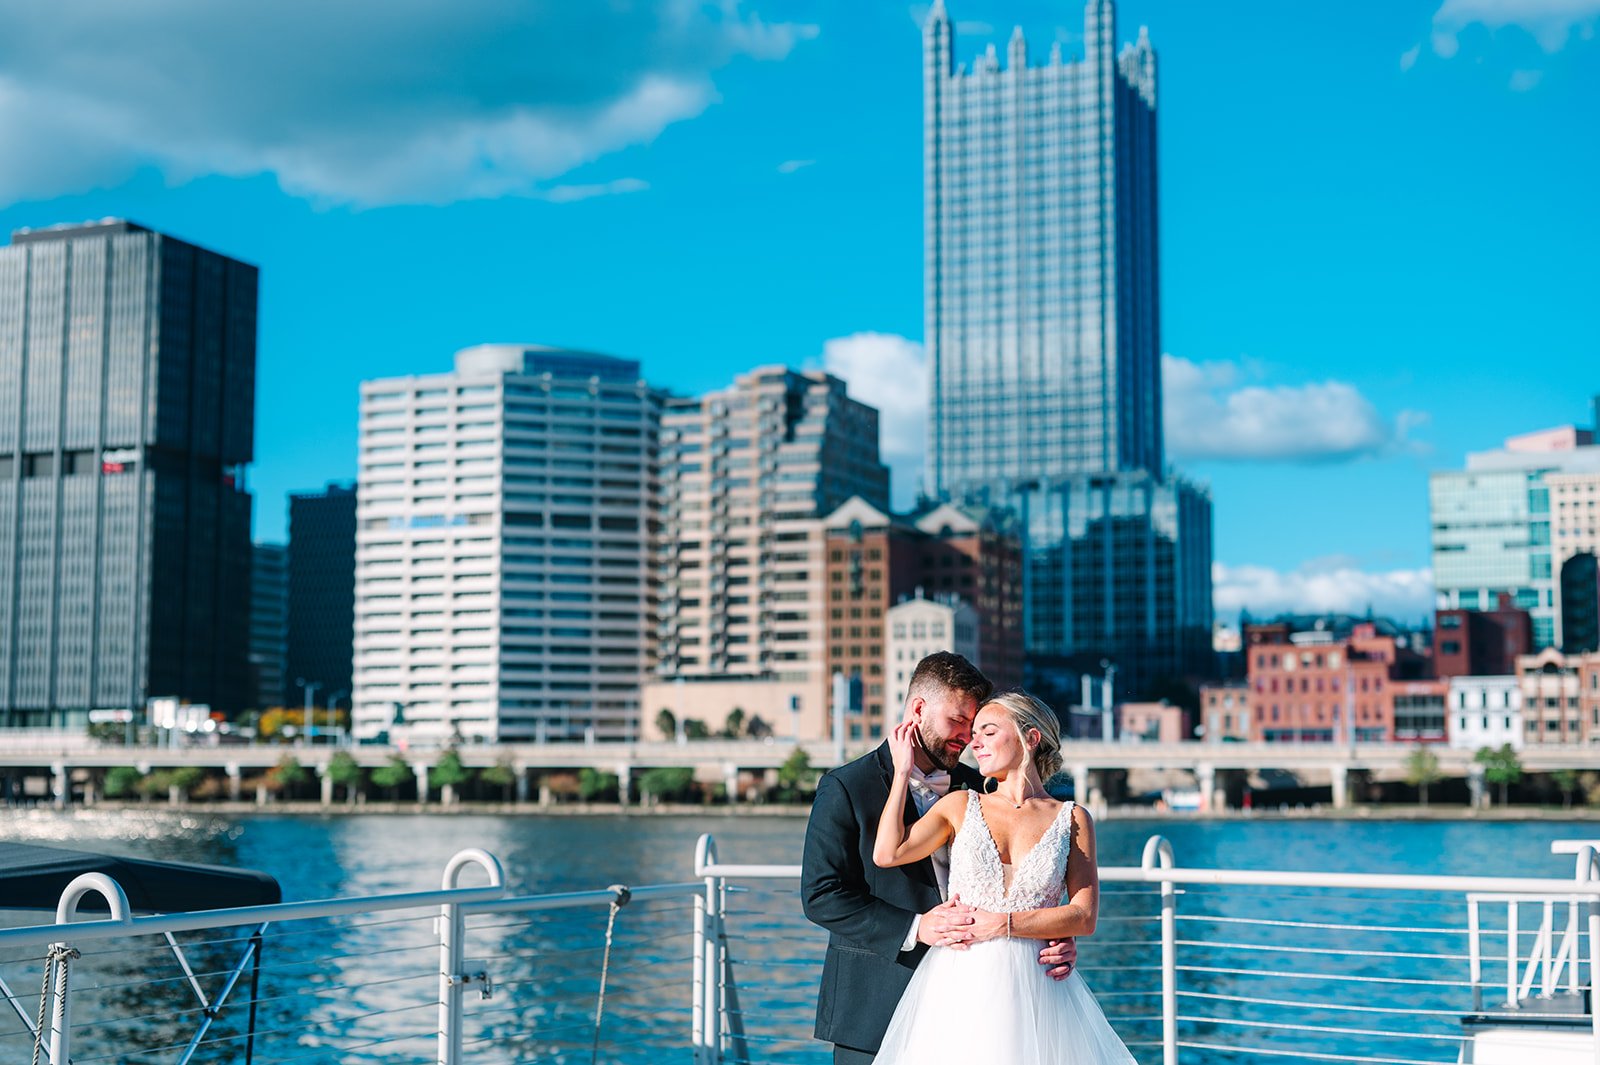 station square wedding photos in pittsburgh